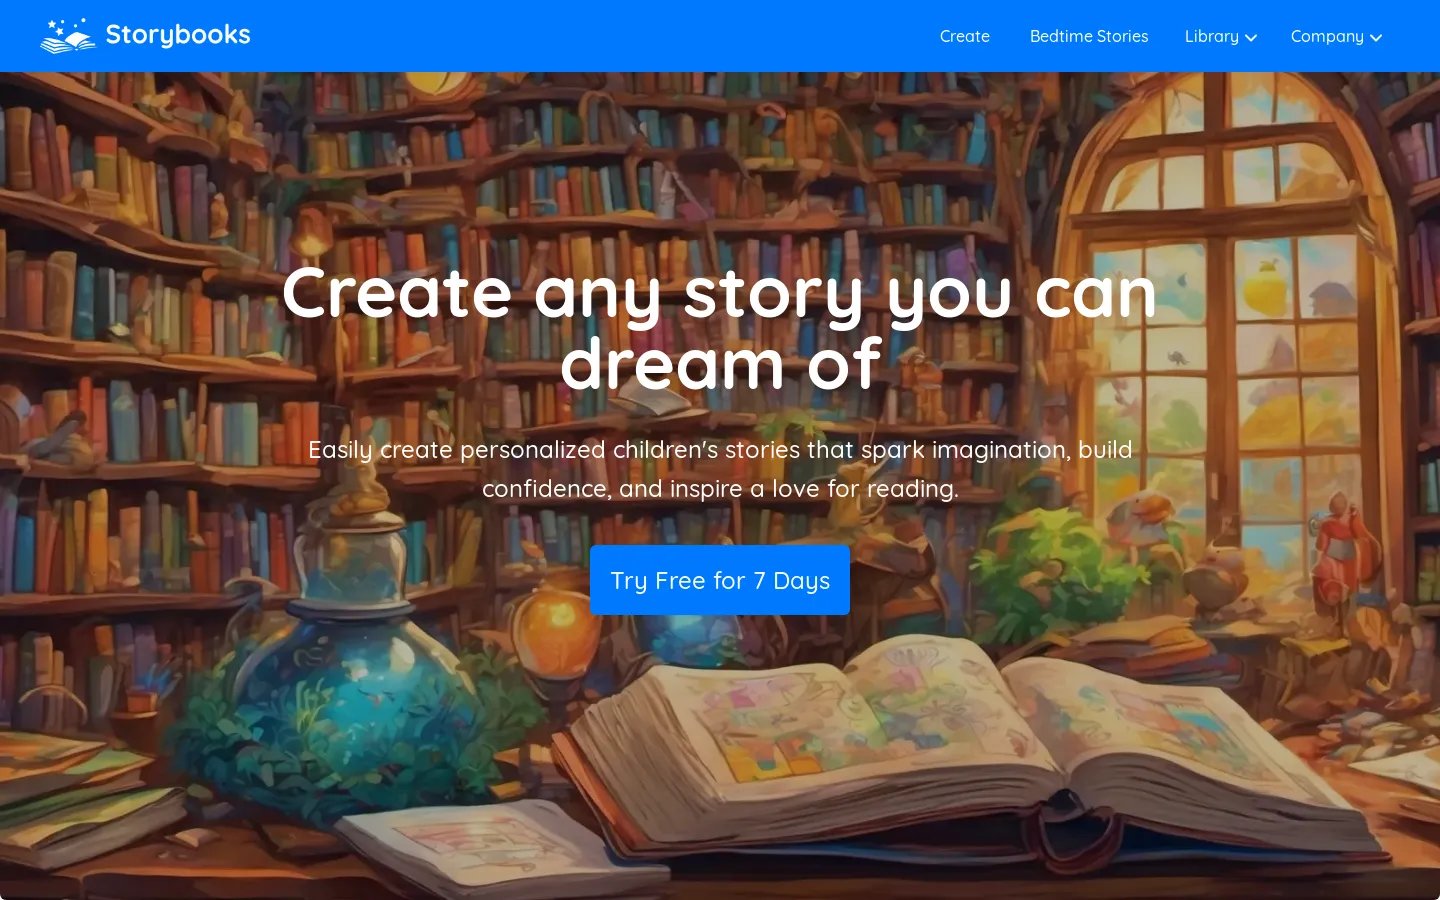 Storybooks - Personalized Stories for Children